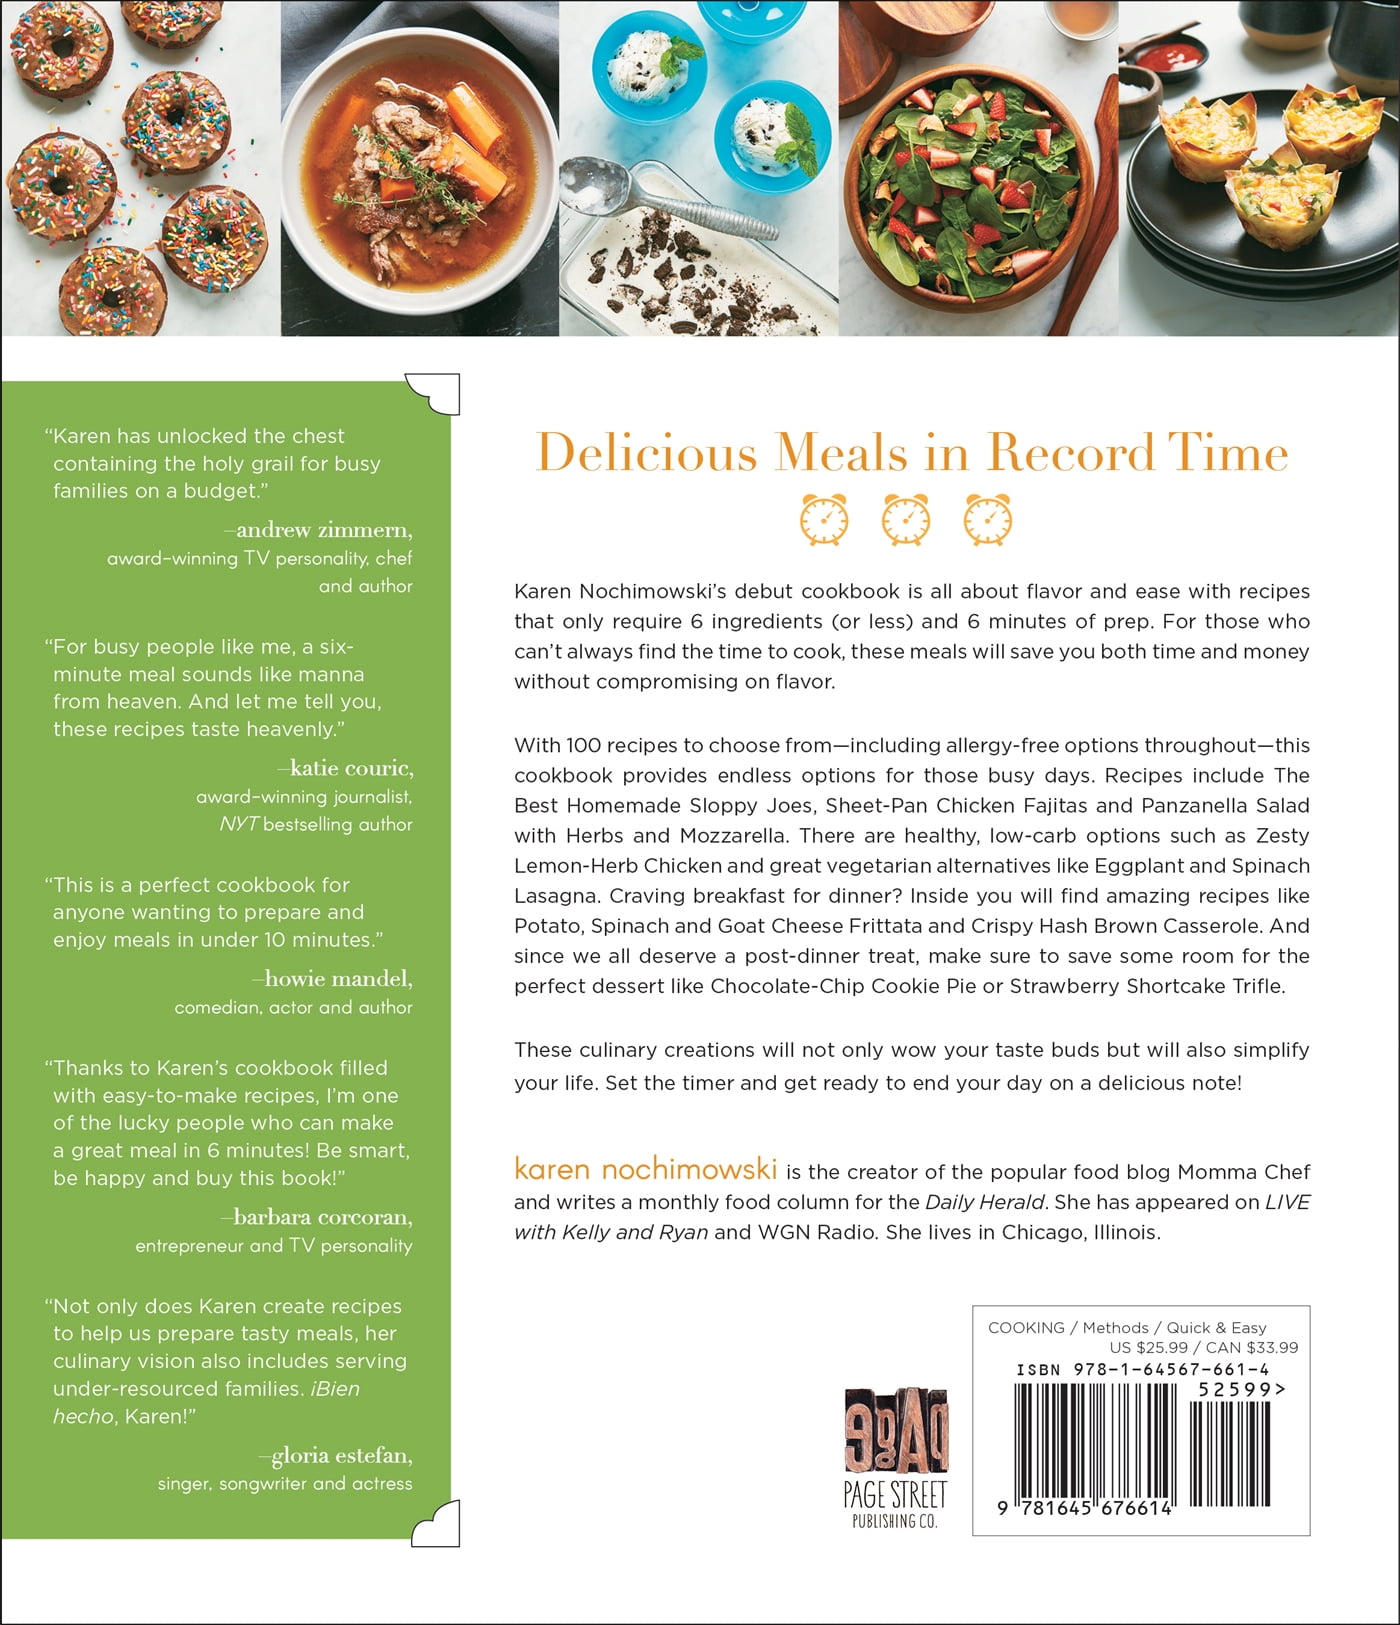 Simple: Over 100 Recipes in 60 Minutes Or Less [Book]